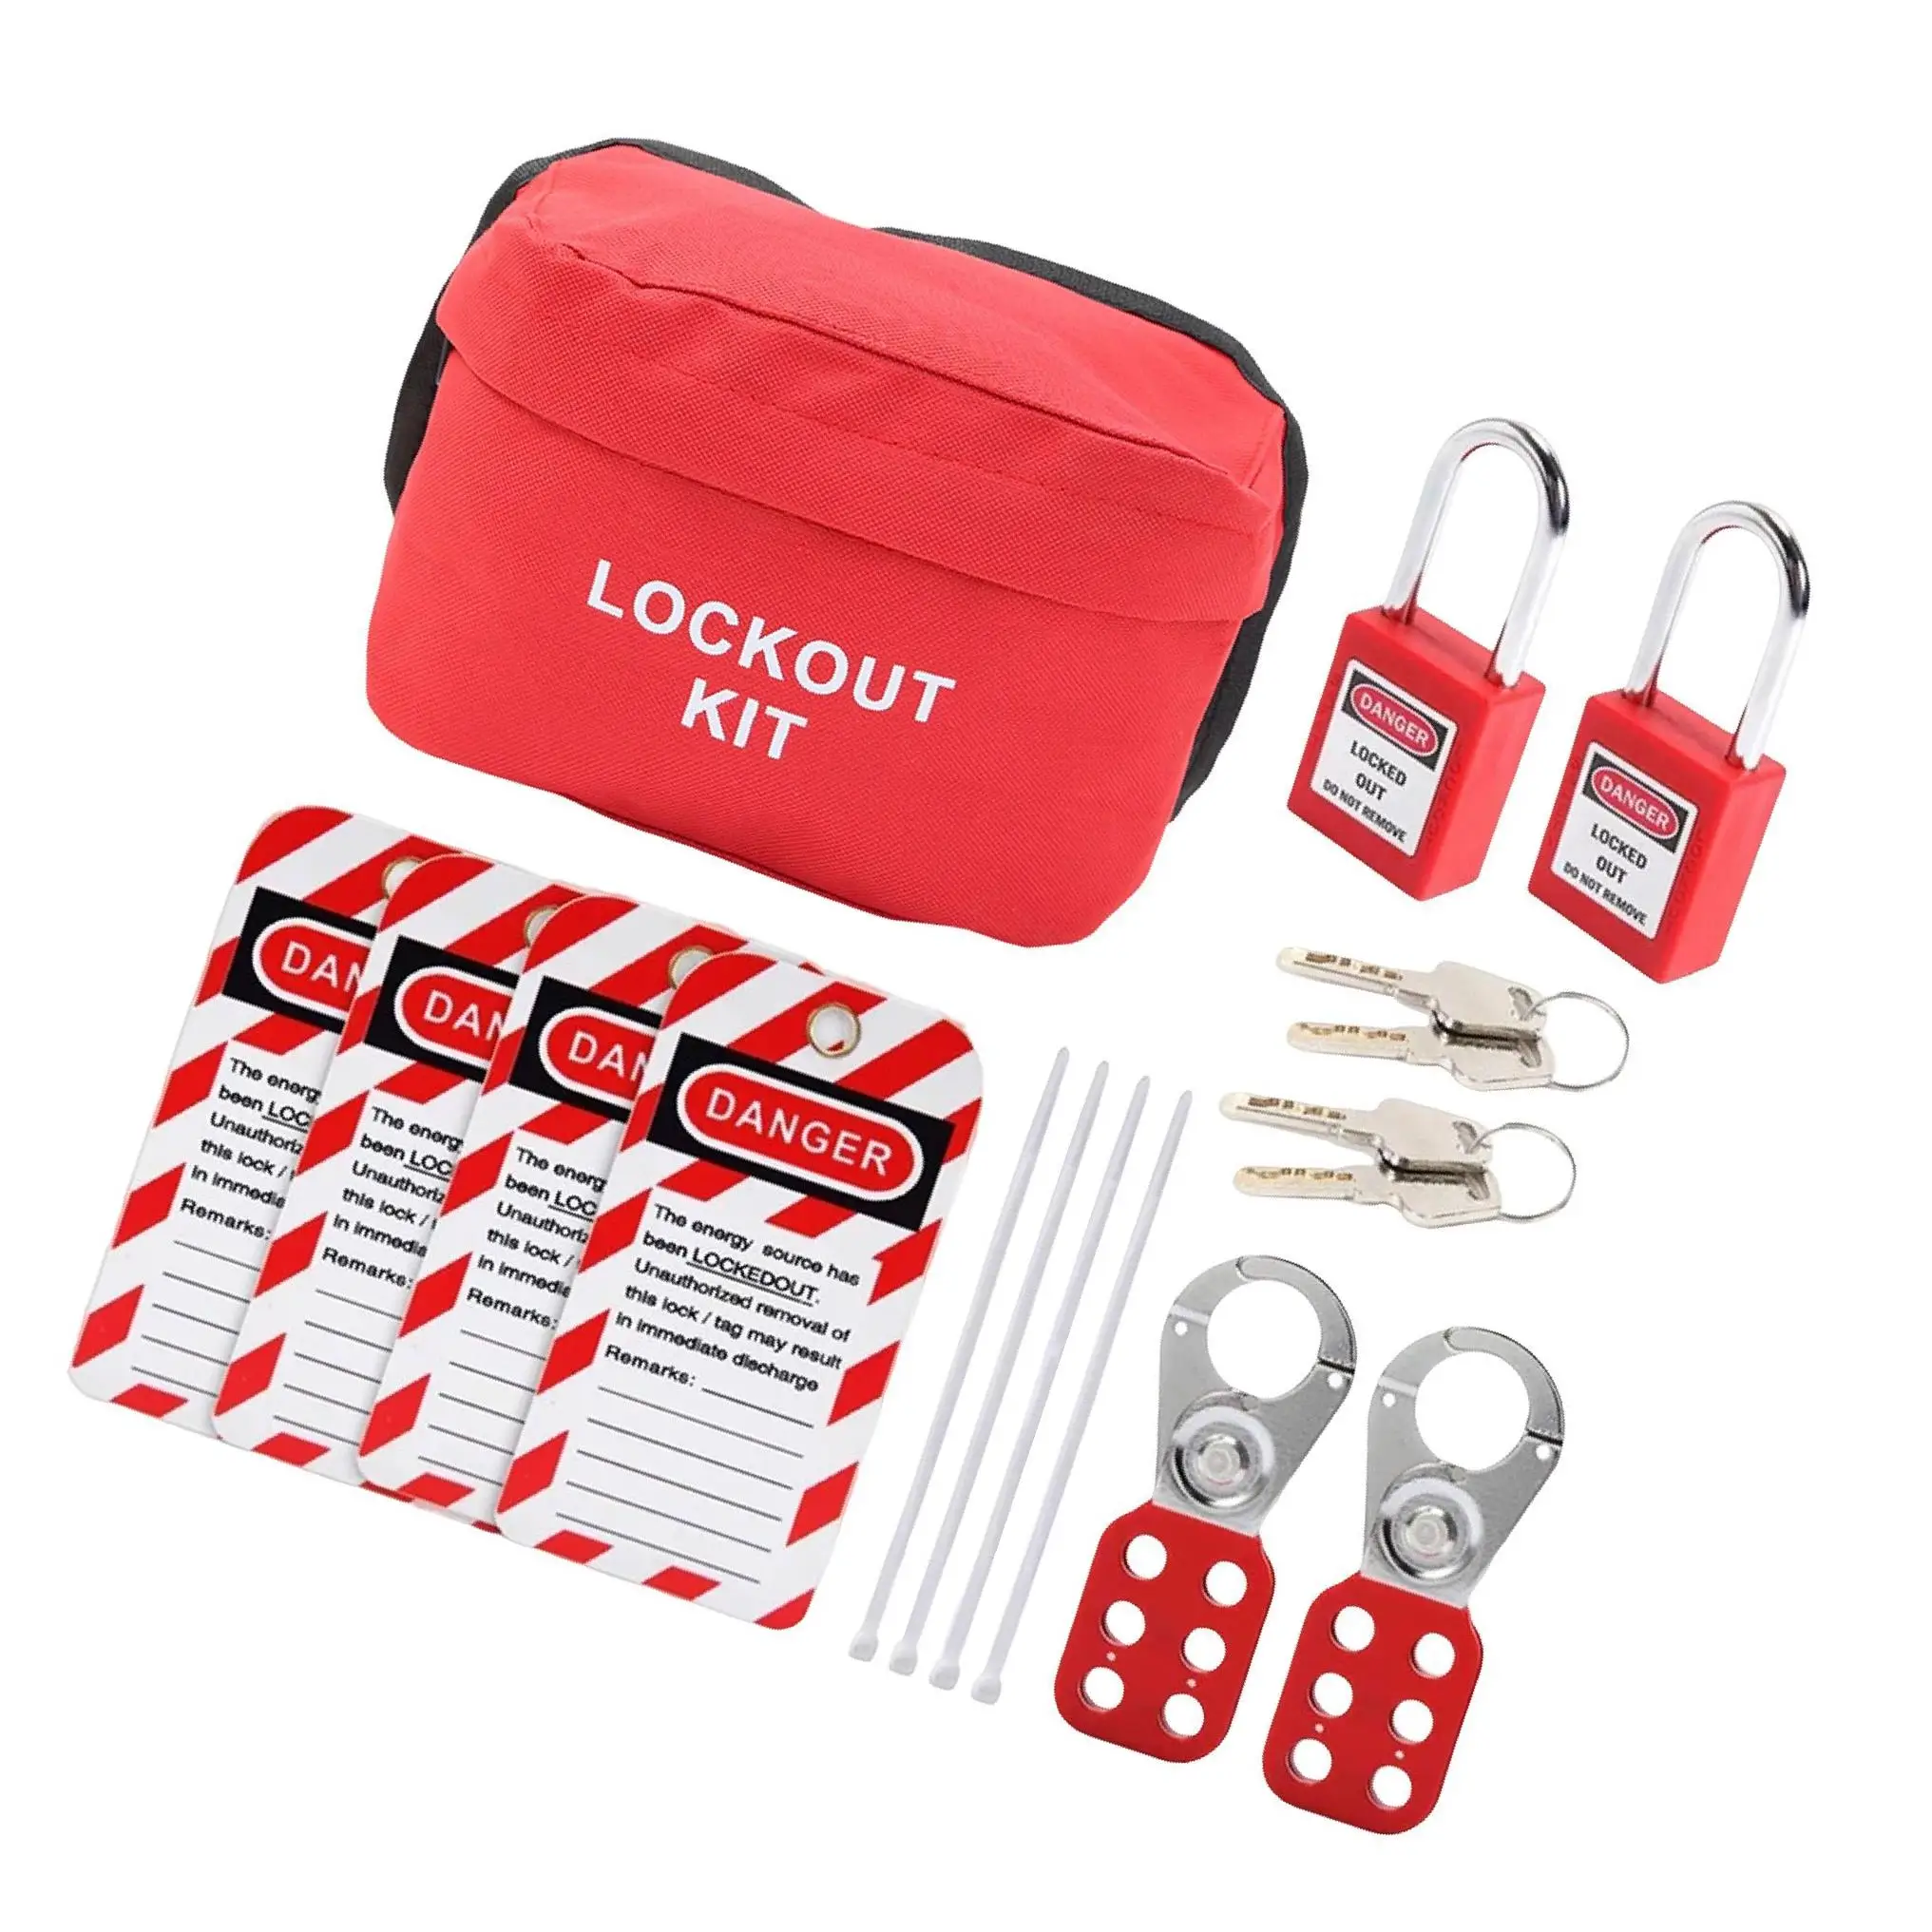 

Heavy Duty Lockout Kit for Industrial Tags Hasps Lockout